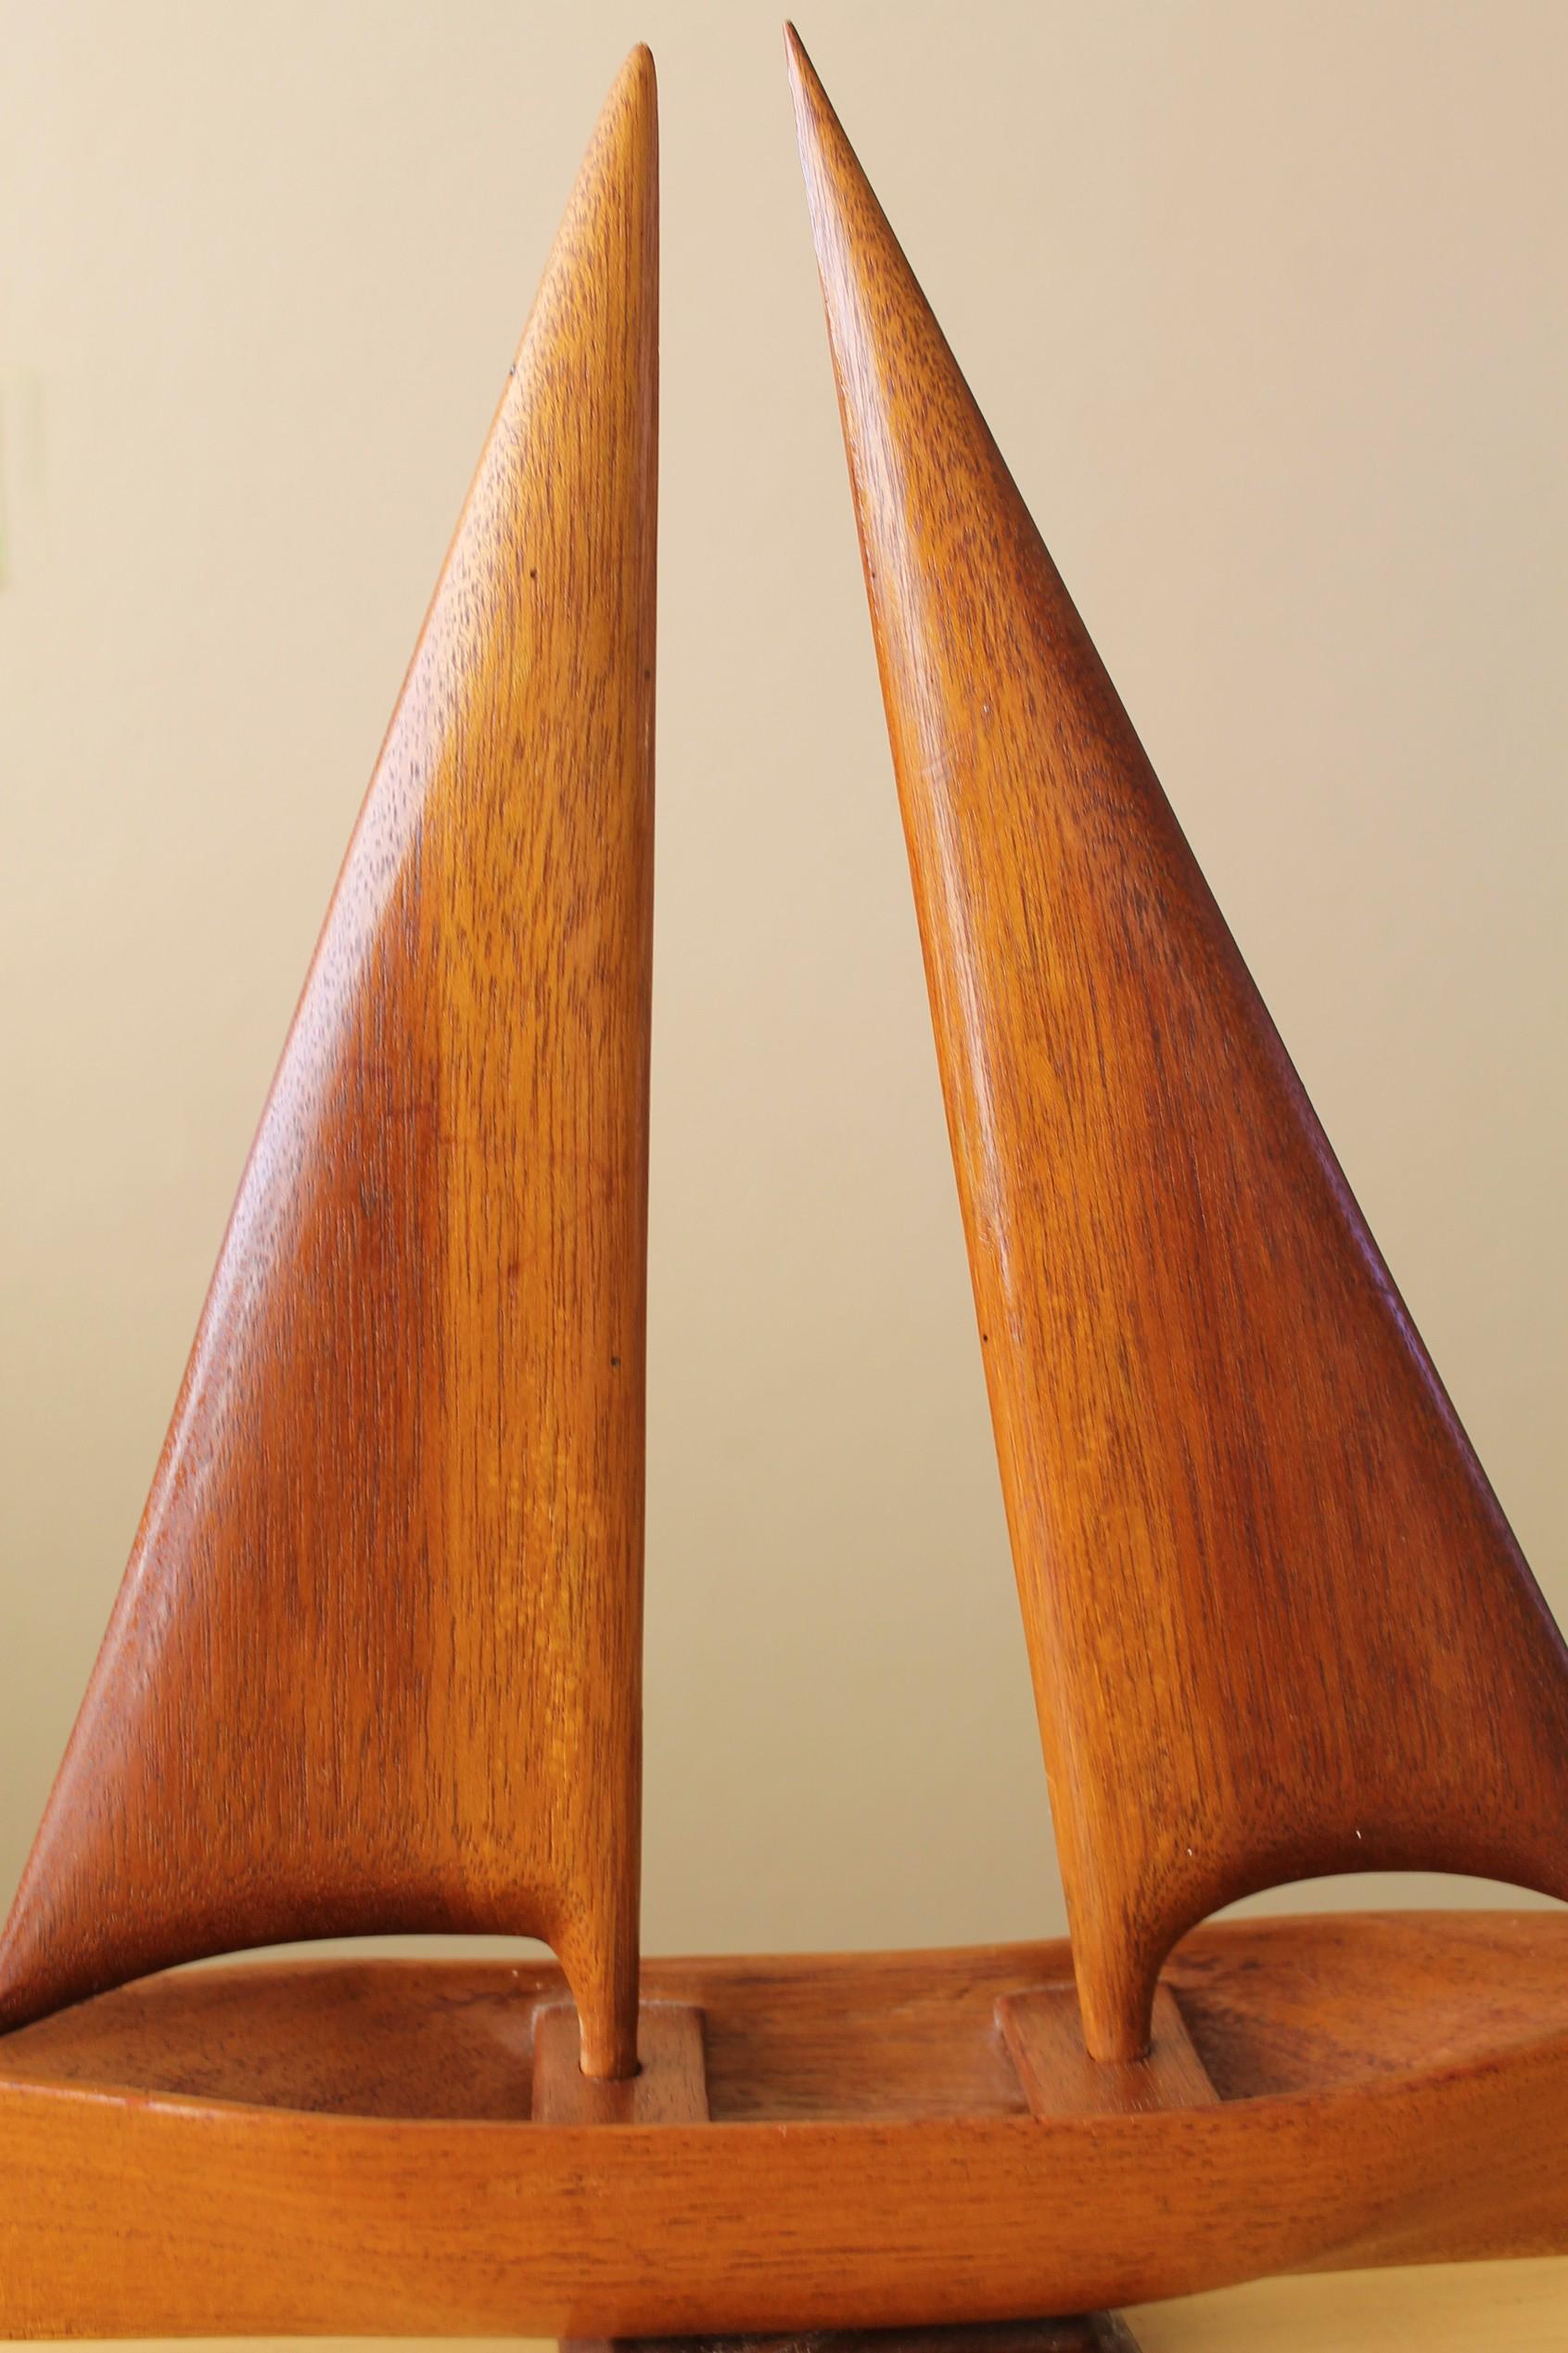 Hand-Carved Gorgeous Mid Century Danish Styled Teak Sailboat Sculpture 1960 For Sale